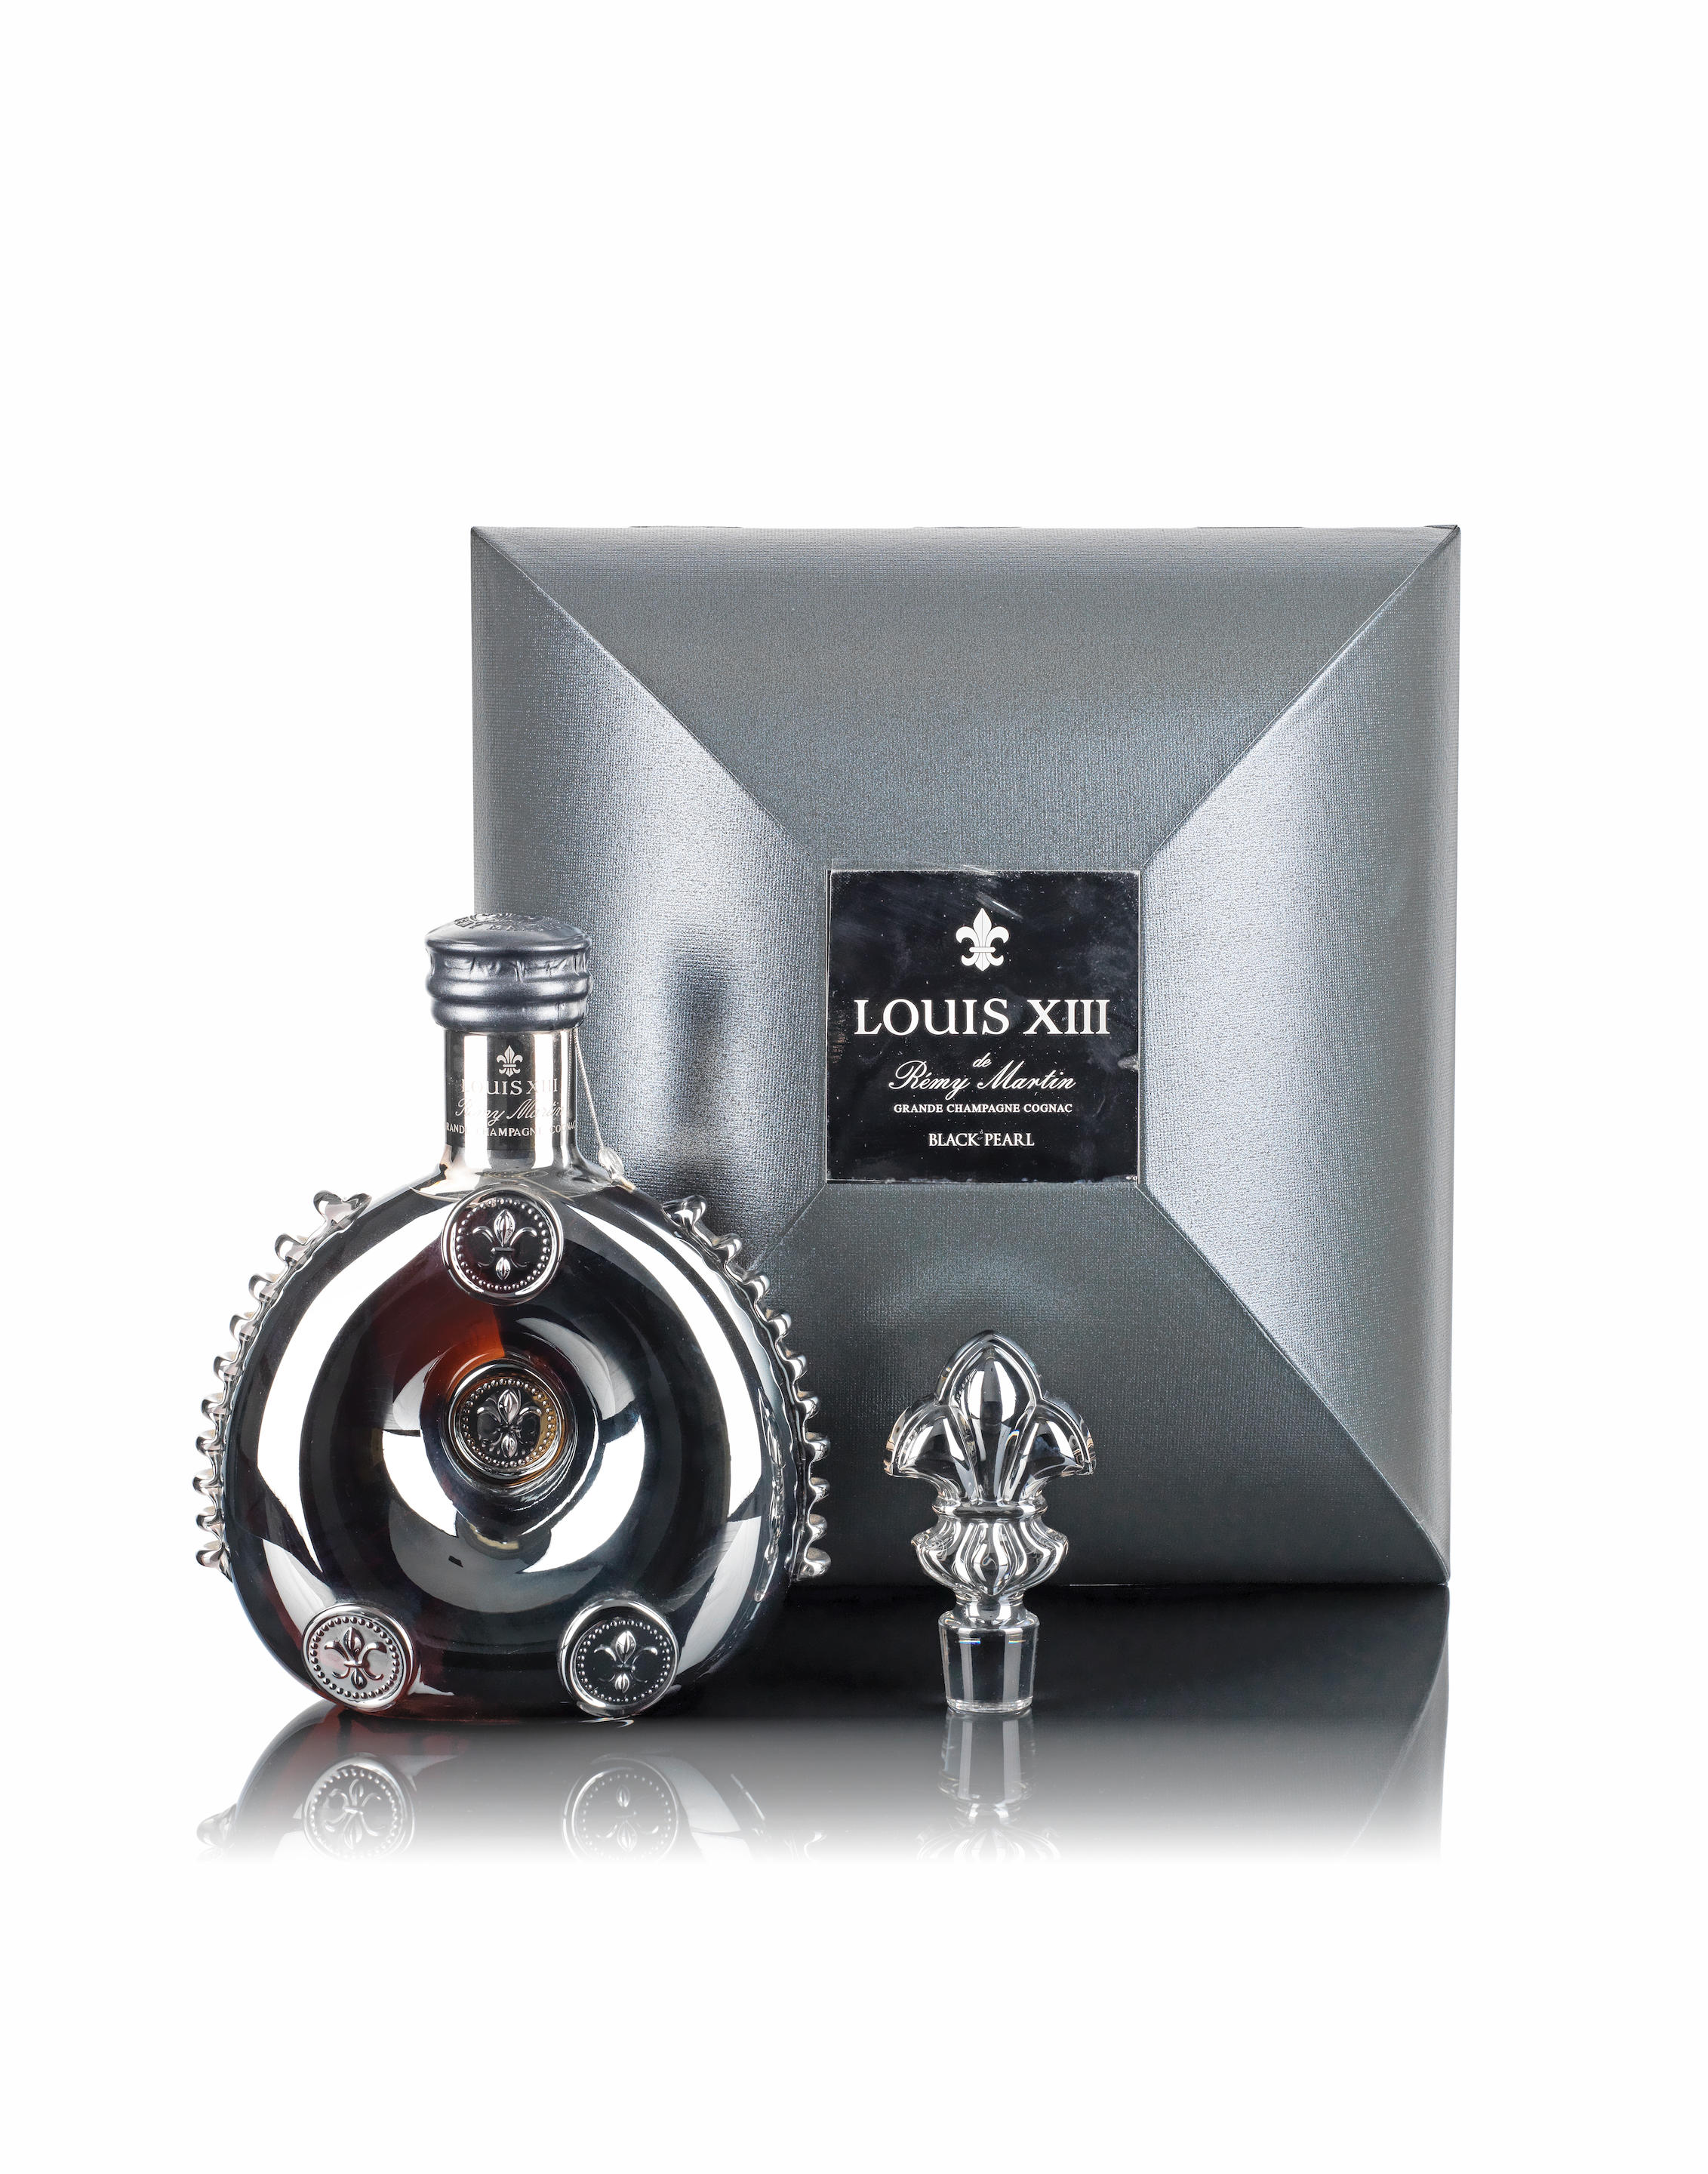 Remy Martin Louis XIII Black Pearl 40.0 abv NV (1.5 Litre), Finest Whisky, Iconic Vintages From The Macallan Distillery, Spirits